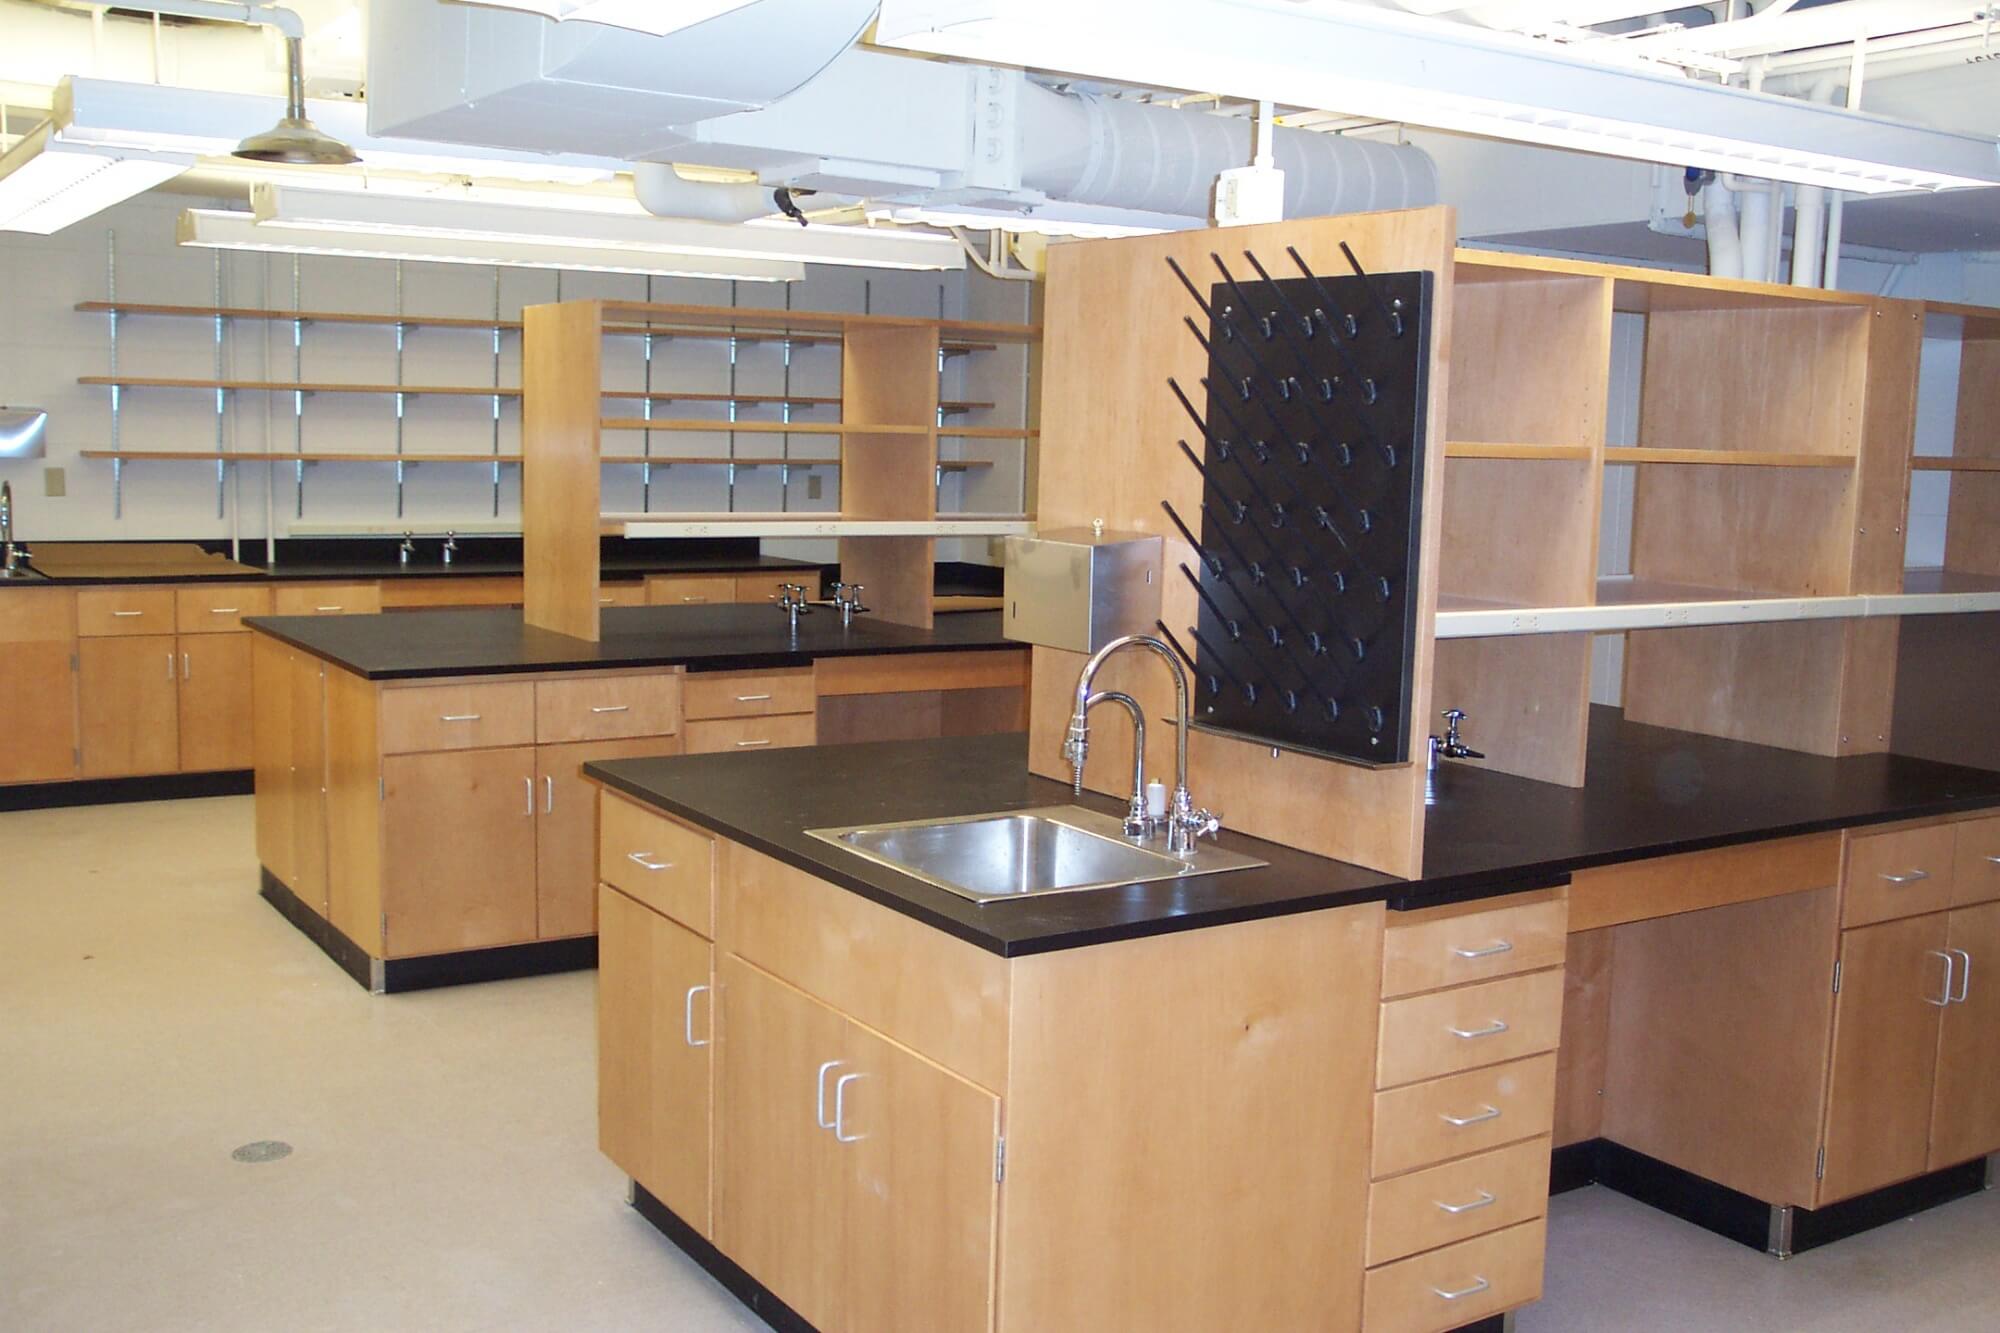 R&D Lab designed with timeless wood casework